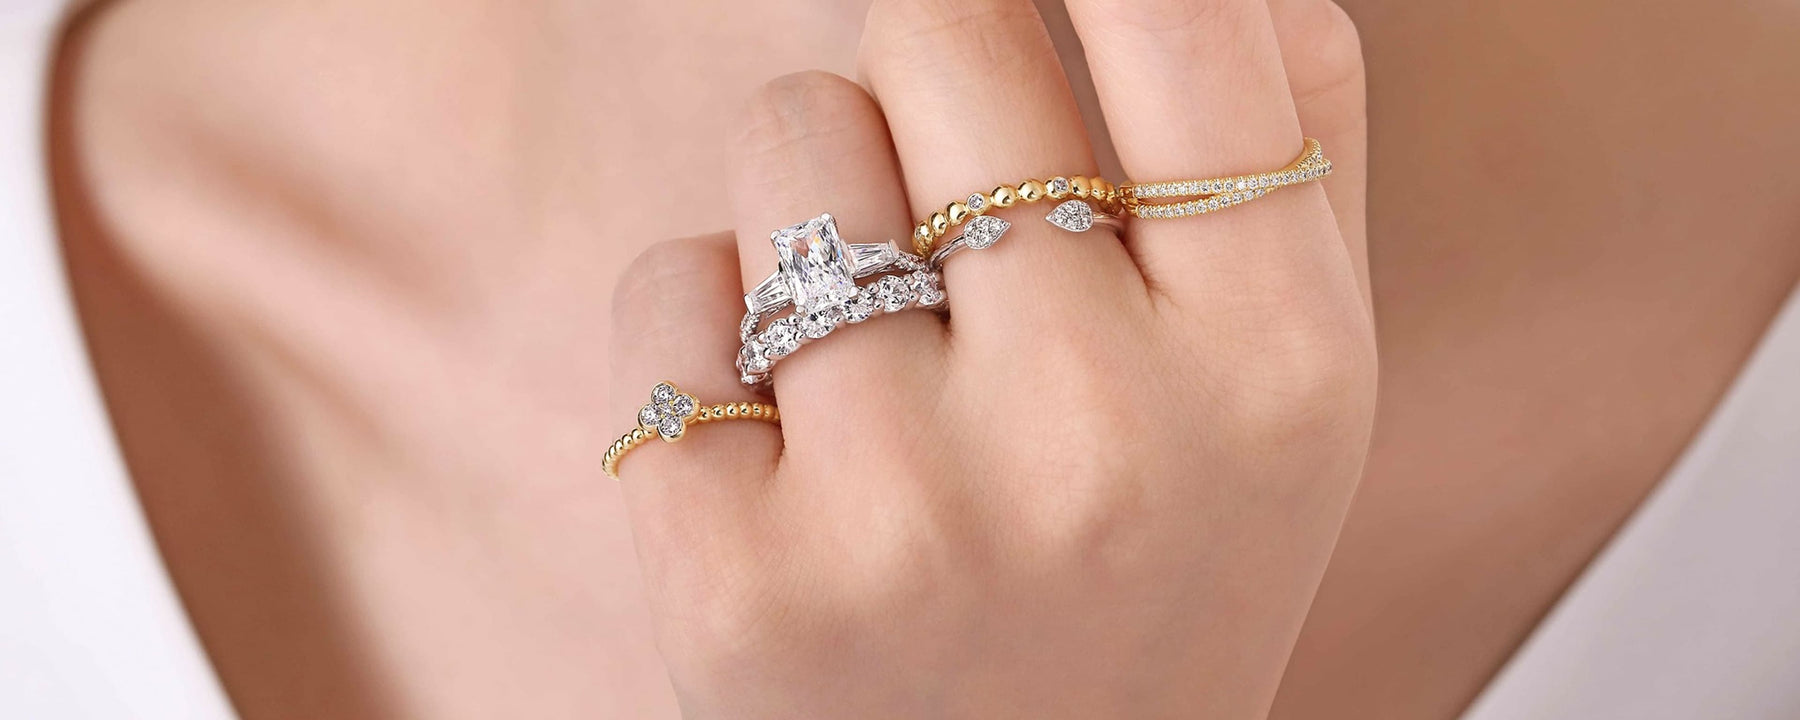 Vintage & Antique Rings | New York Jewelry Boutique